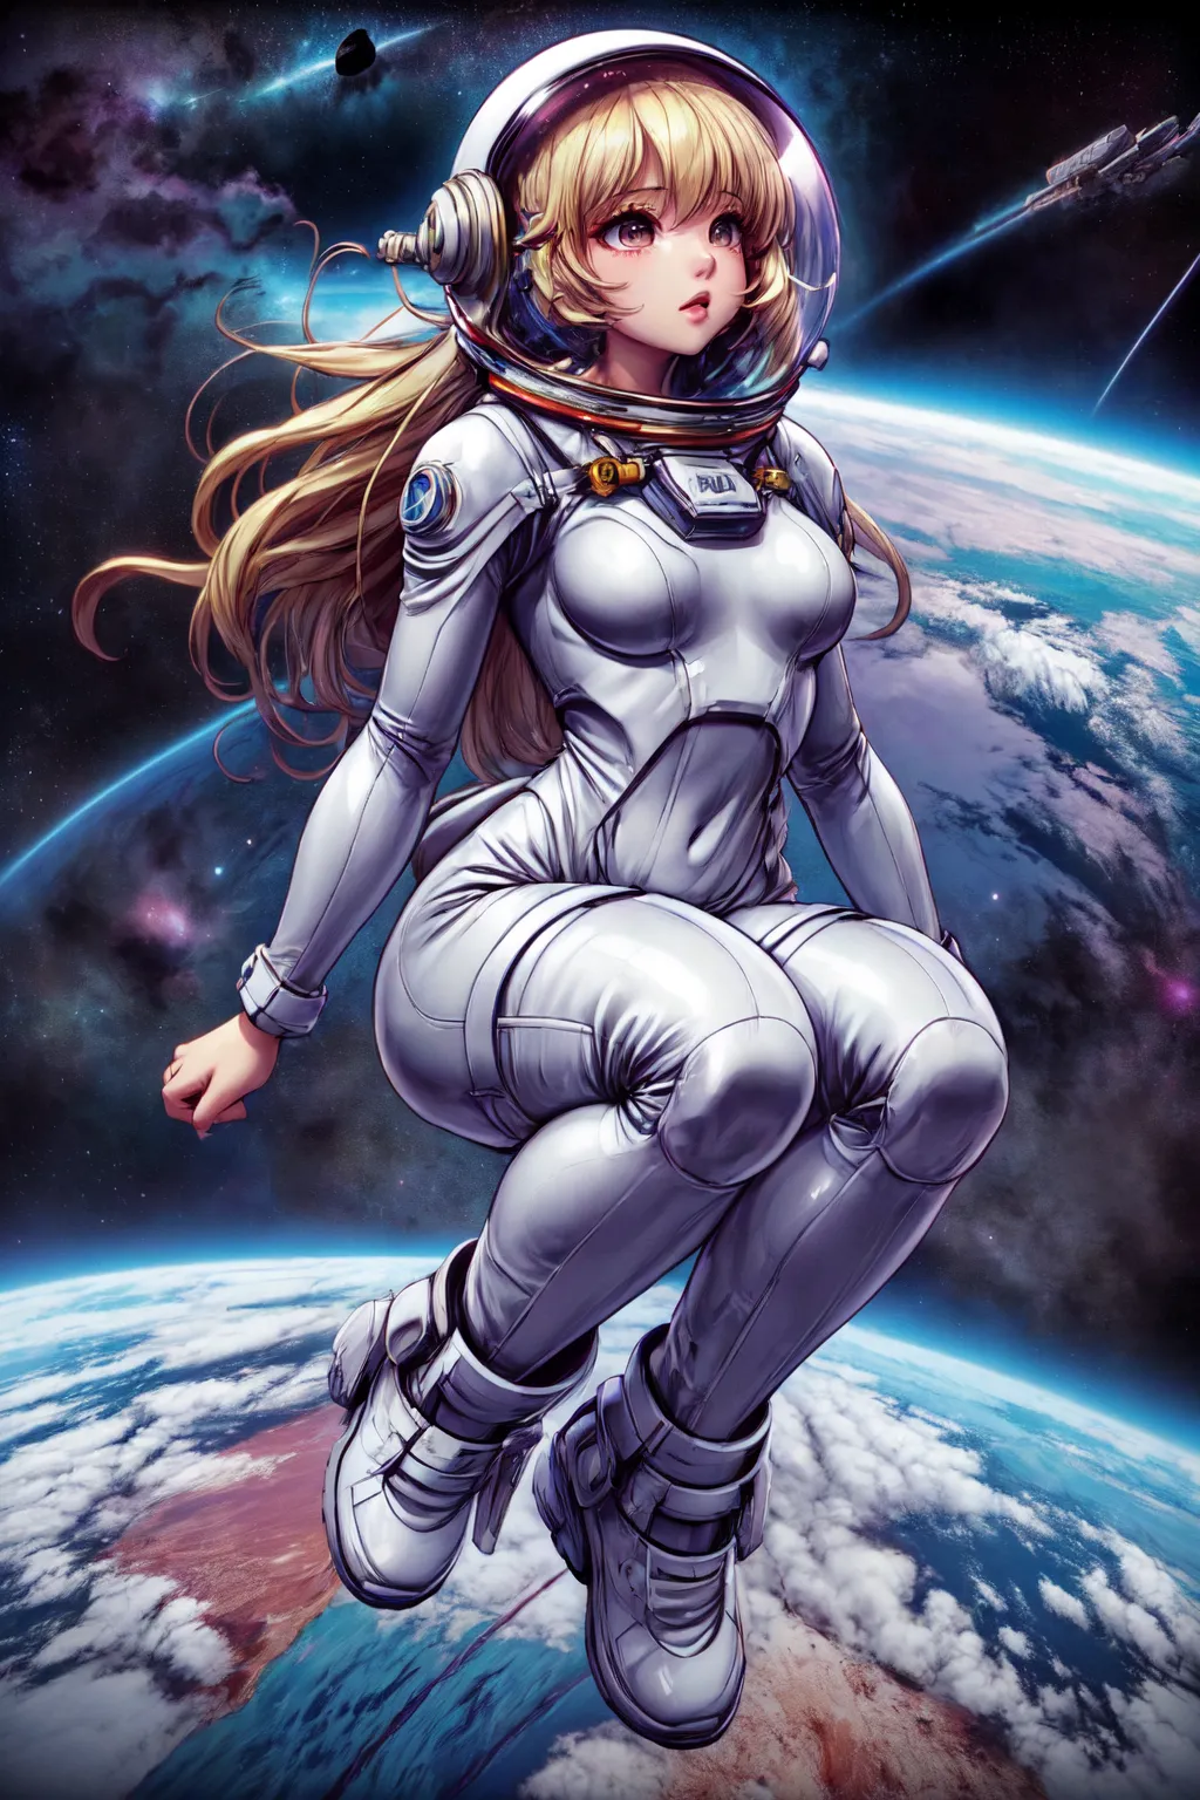 tight spacesuit image by slime77744784